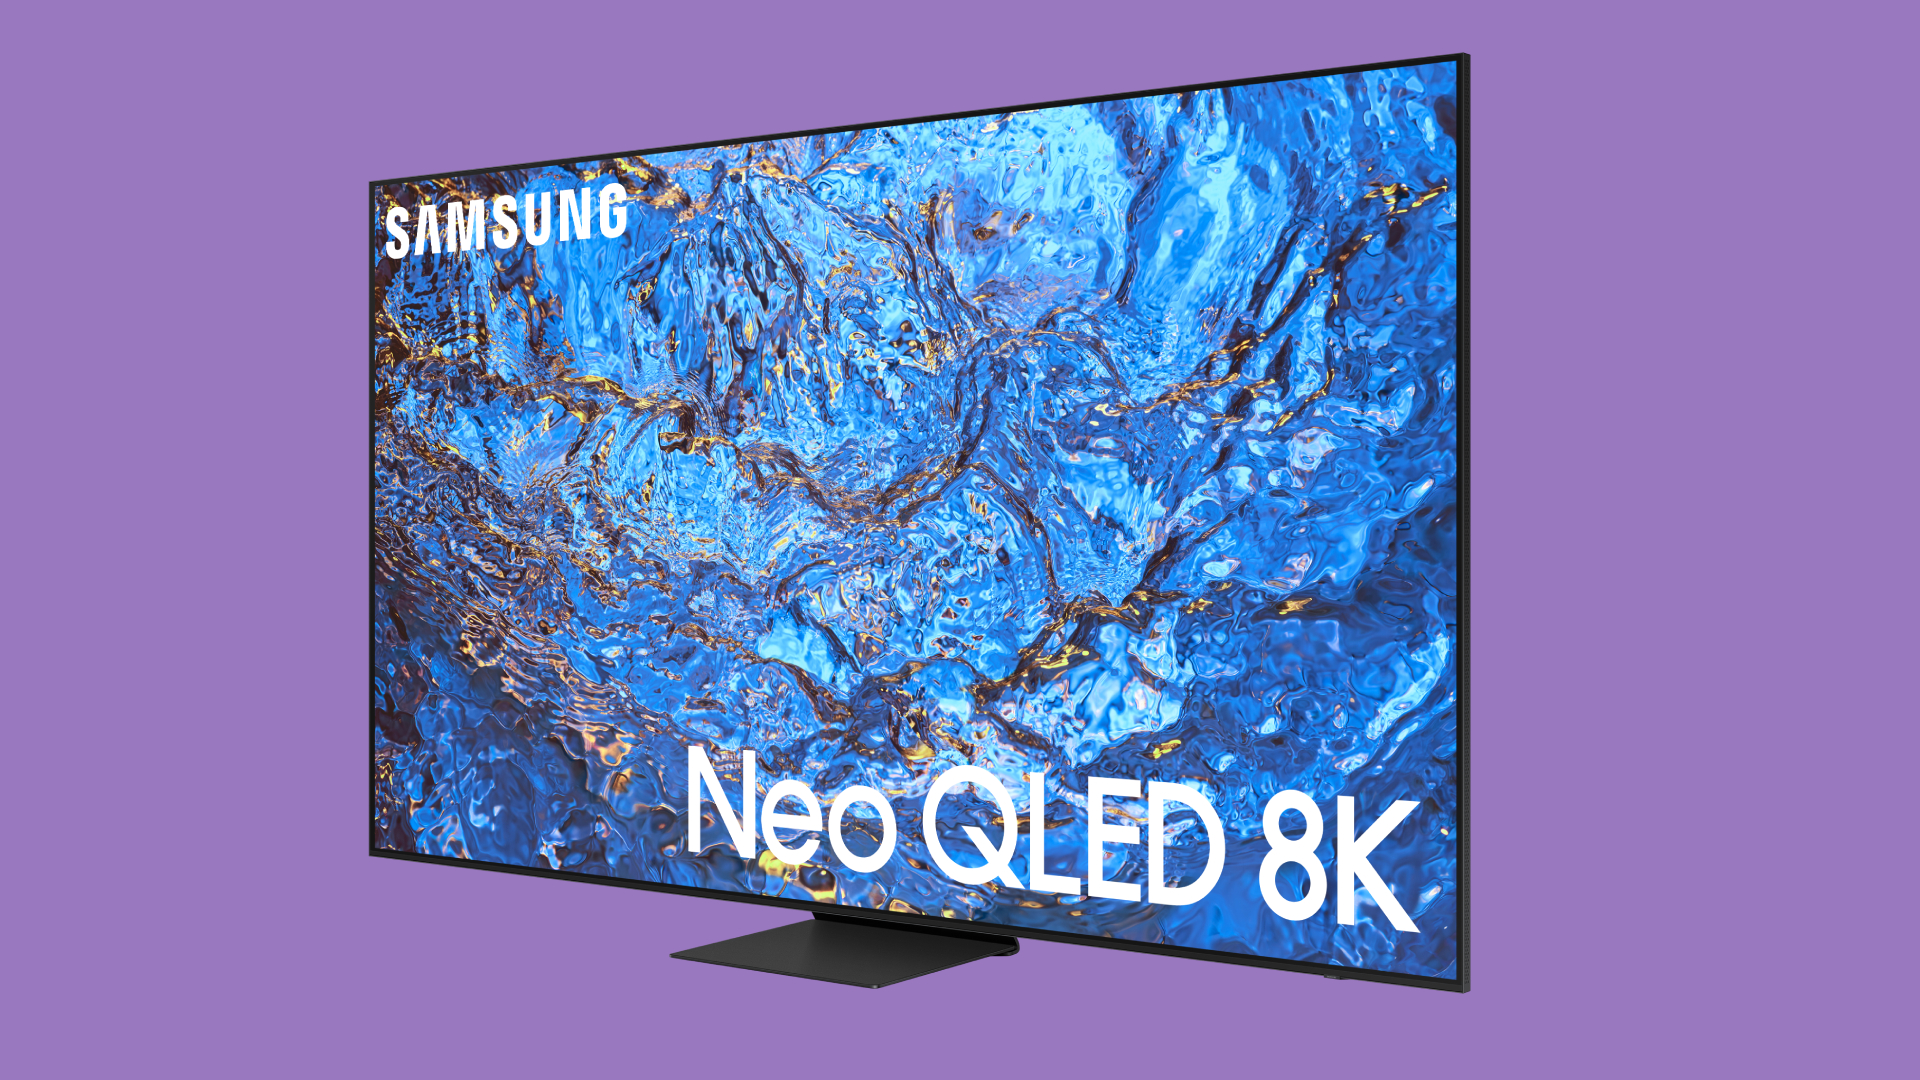 Samsung's biggest Neo QLED 8K TV comes with an equally huge price